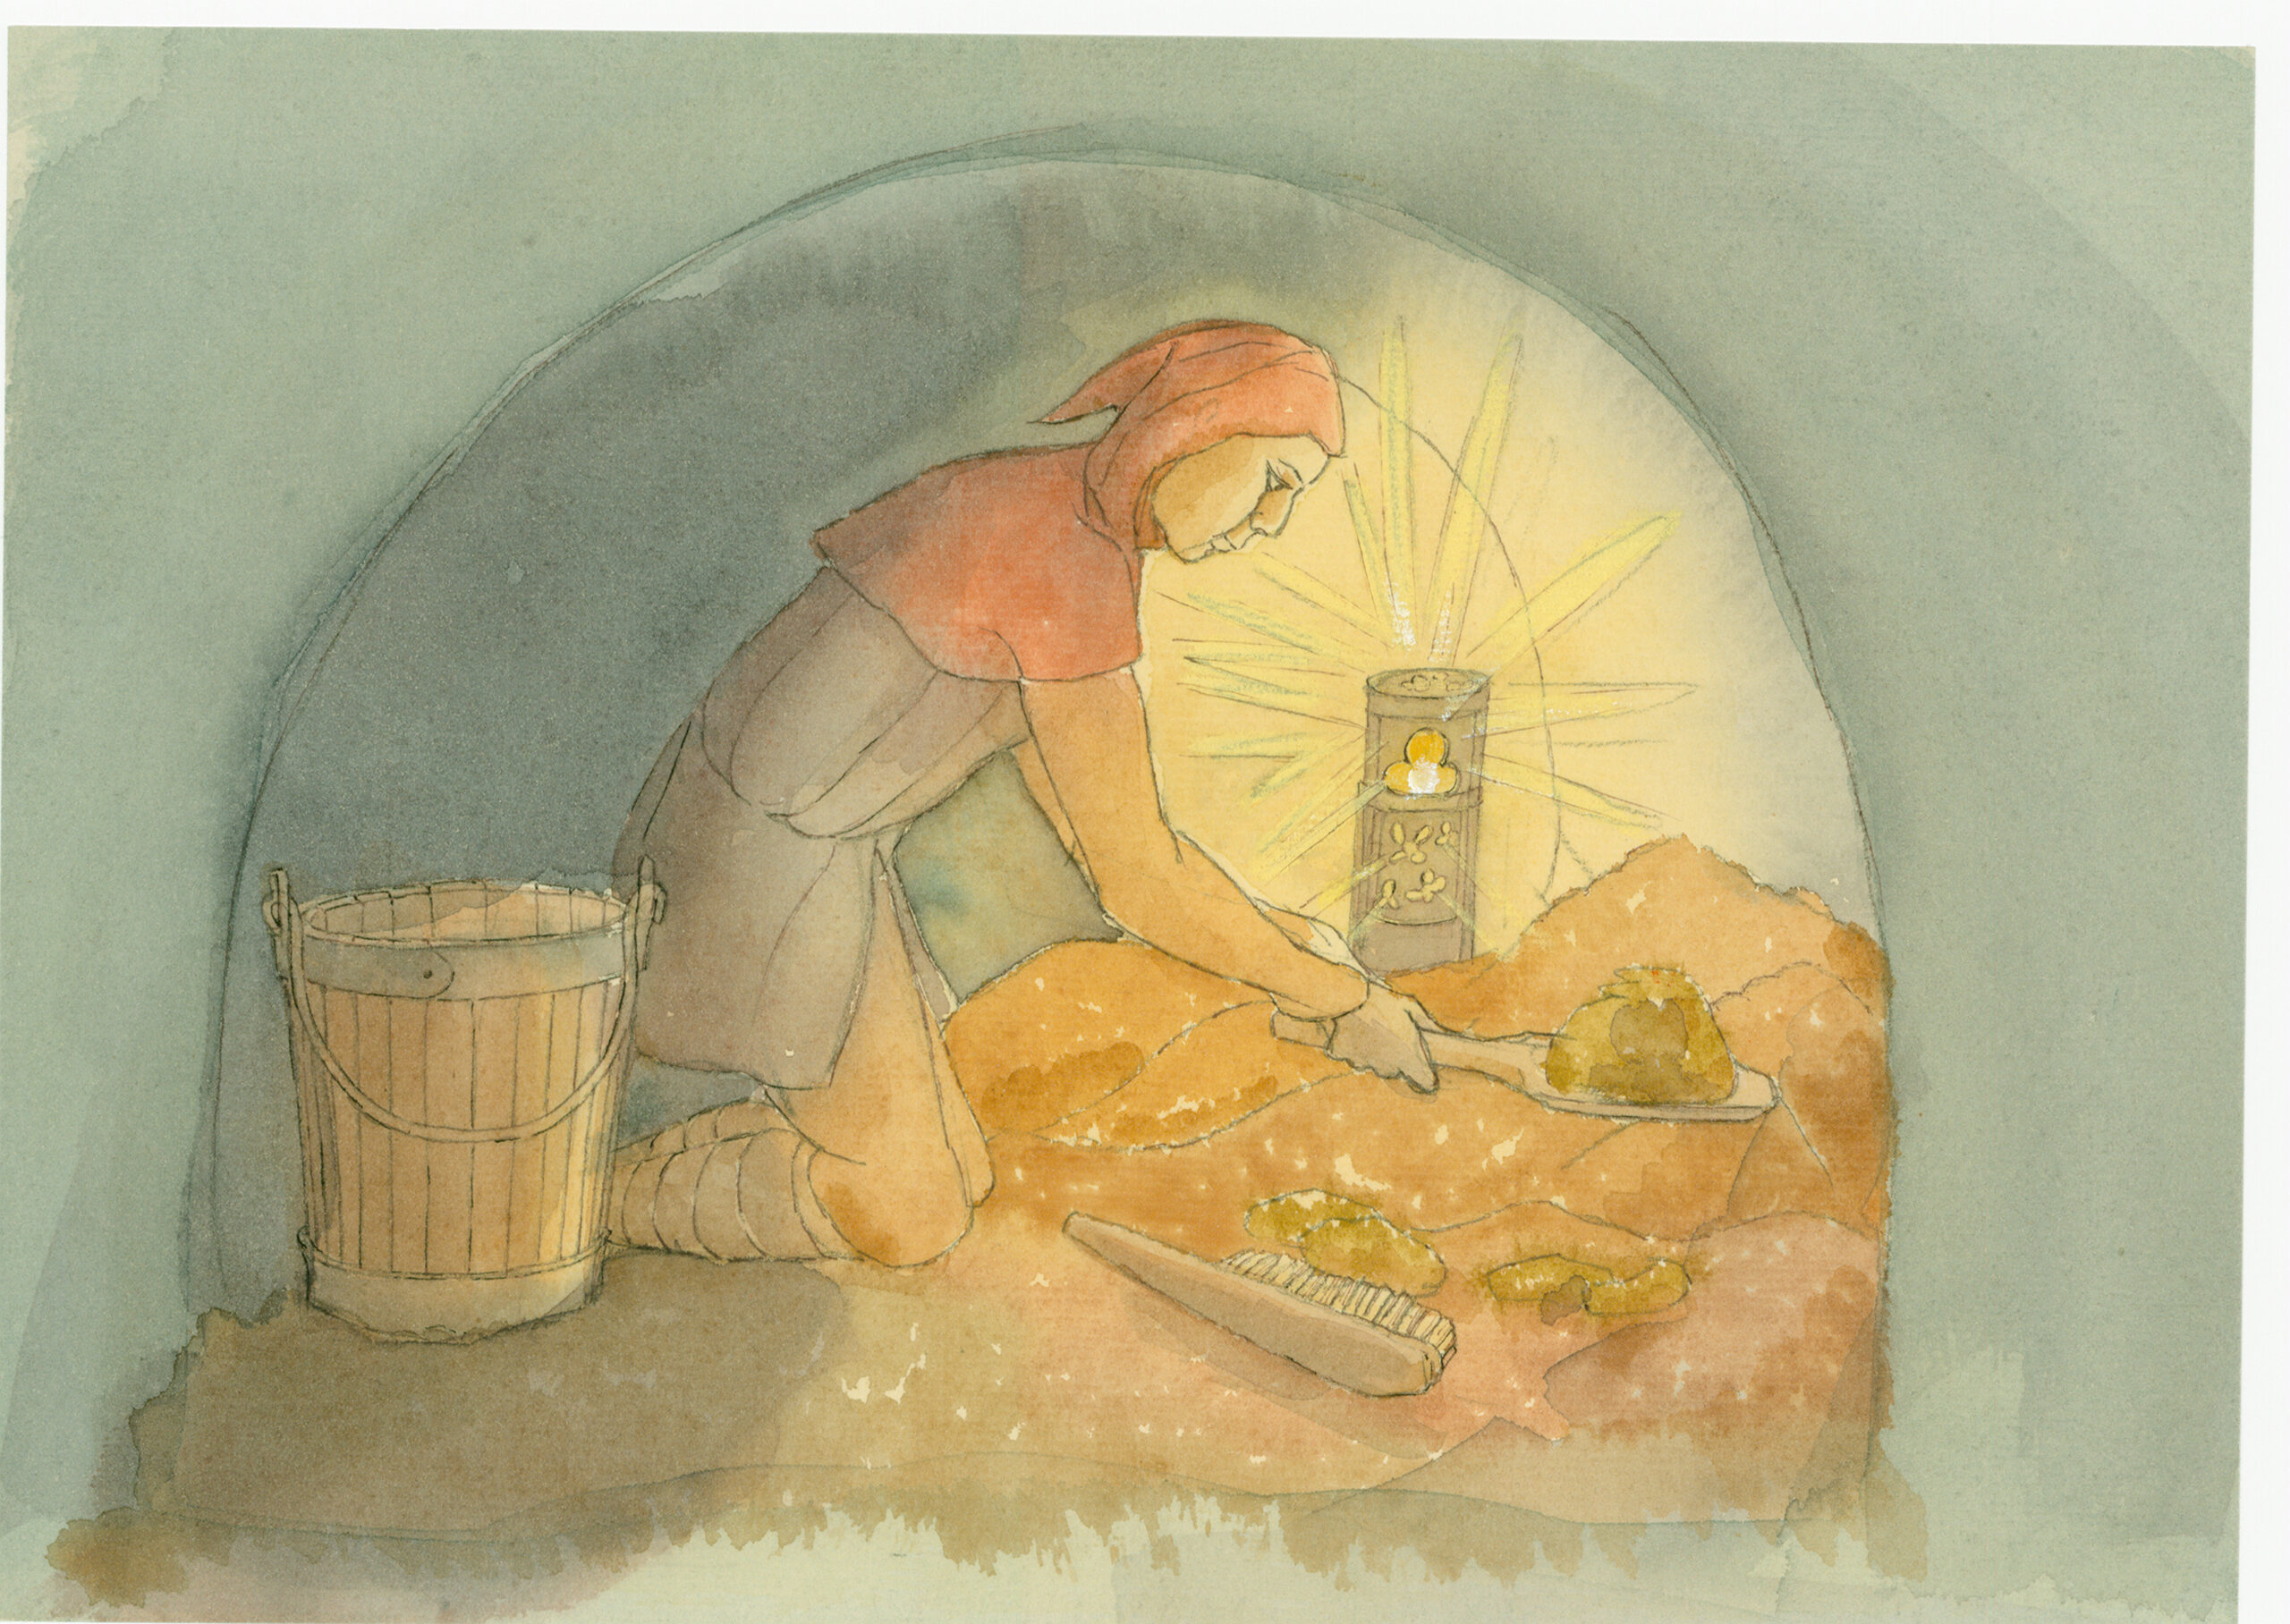 A medieval gongfermour, or gong farmer, at work, 2004. A reconstruction illustration of a medieval gongfermour, or gong farmer, at work. A gongfermour is a Tudor term that describes someone whose job entailed removing human excrement from cesspits and privies. They only worked at night, and were often called 'nightmen', and the collections as 'night soil'. The waste had to be taken out of town boundaries. The gongfermour is working at night by candlelight, and is possibly in a cesspit or privvy. The illustration was made for the educational department to use on medieval locations. Artist Judith Dobie. (Photo by Historic England Archive/Heritage Images via Getty Images)